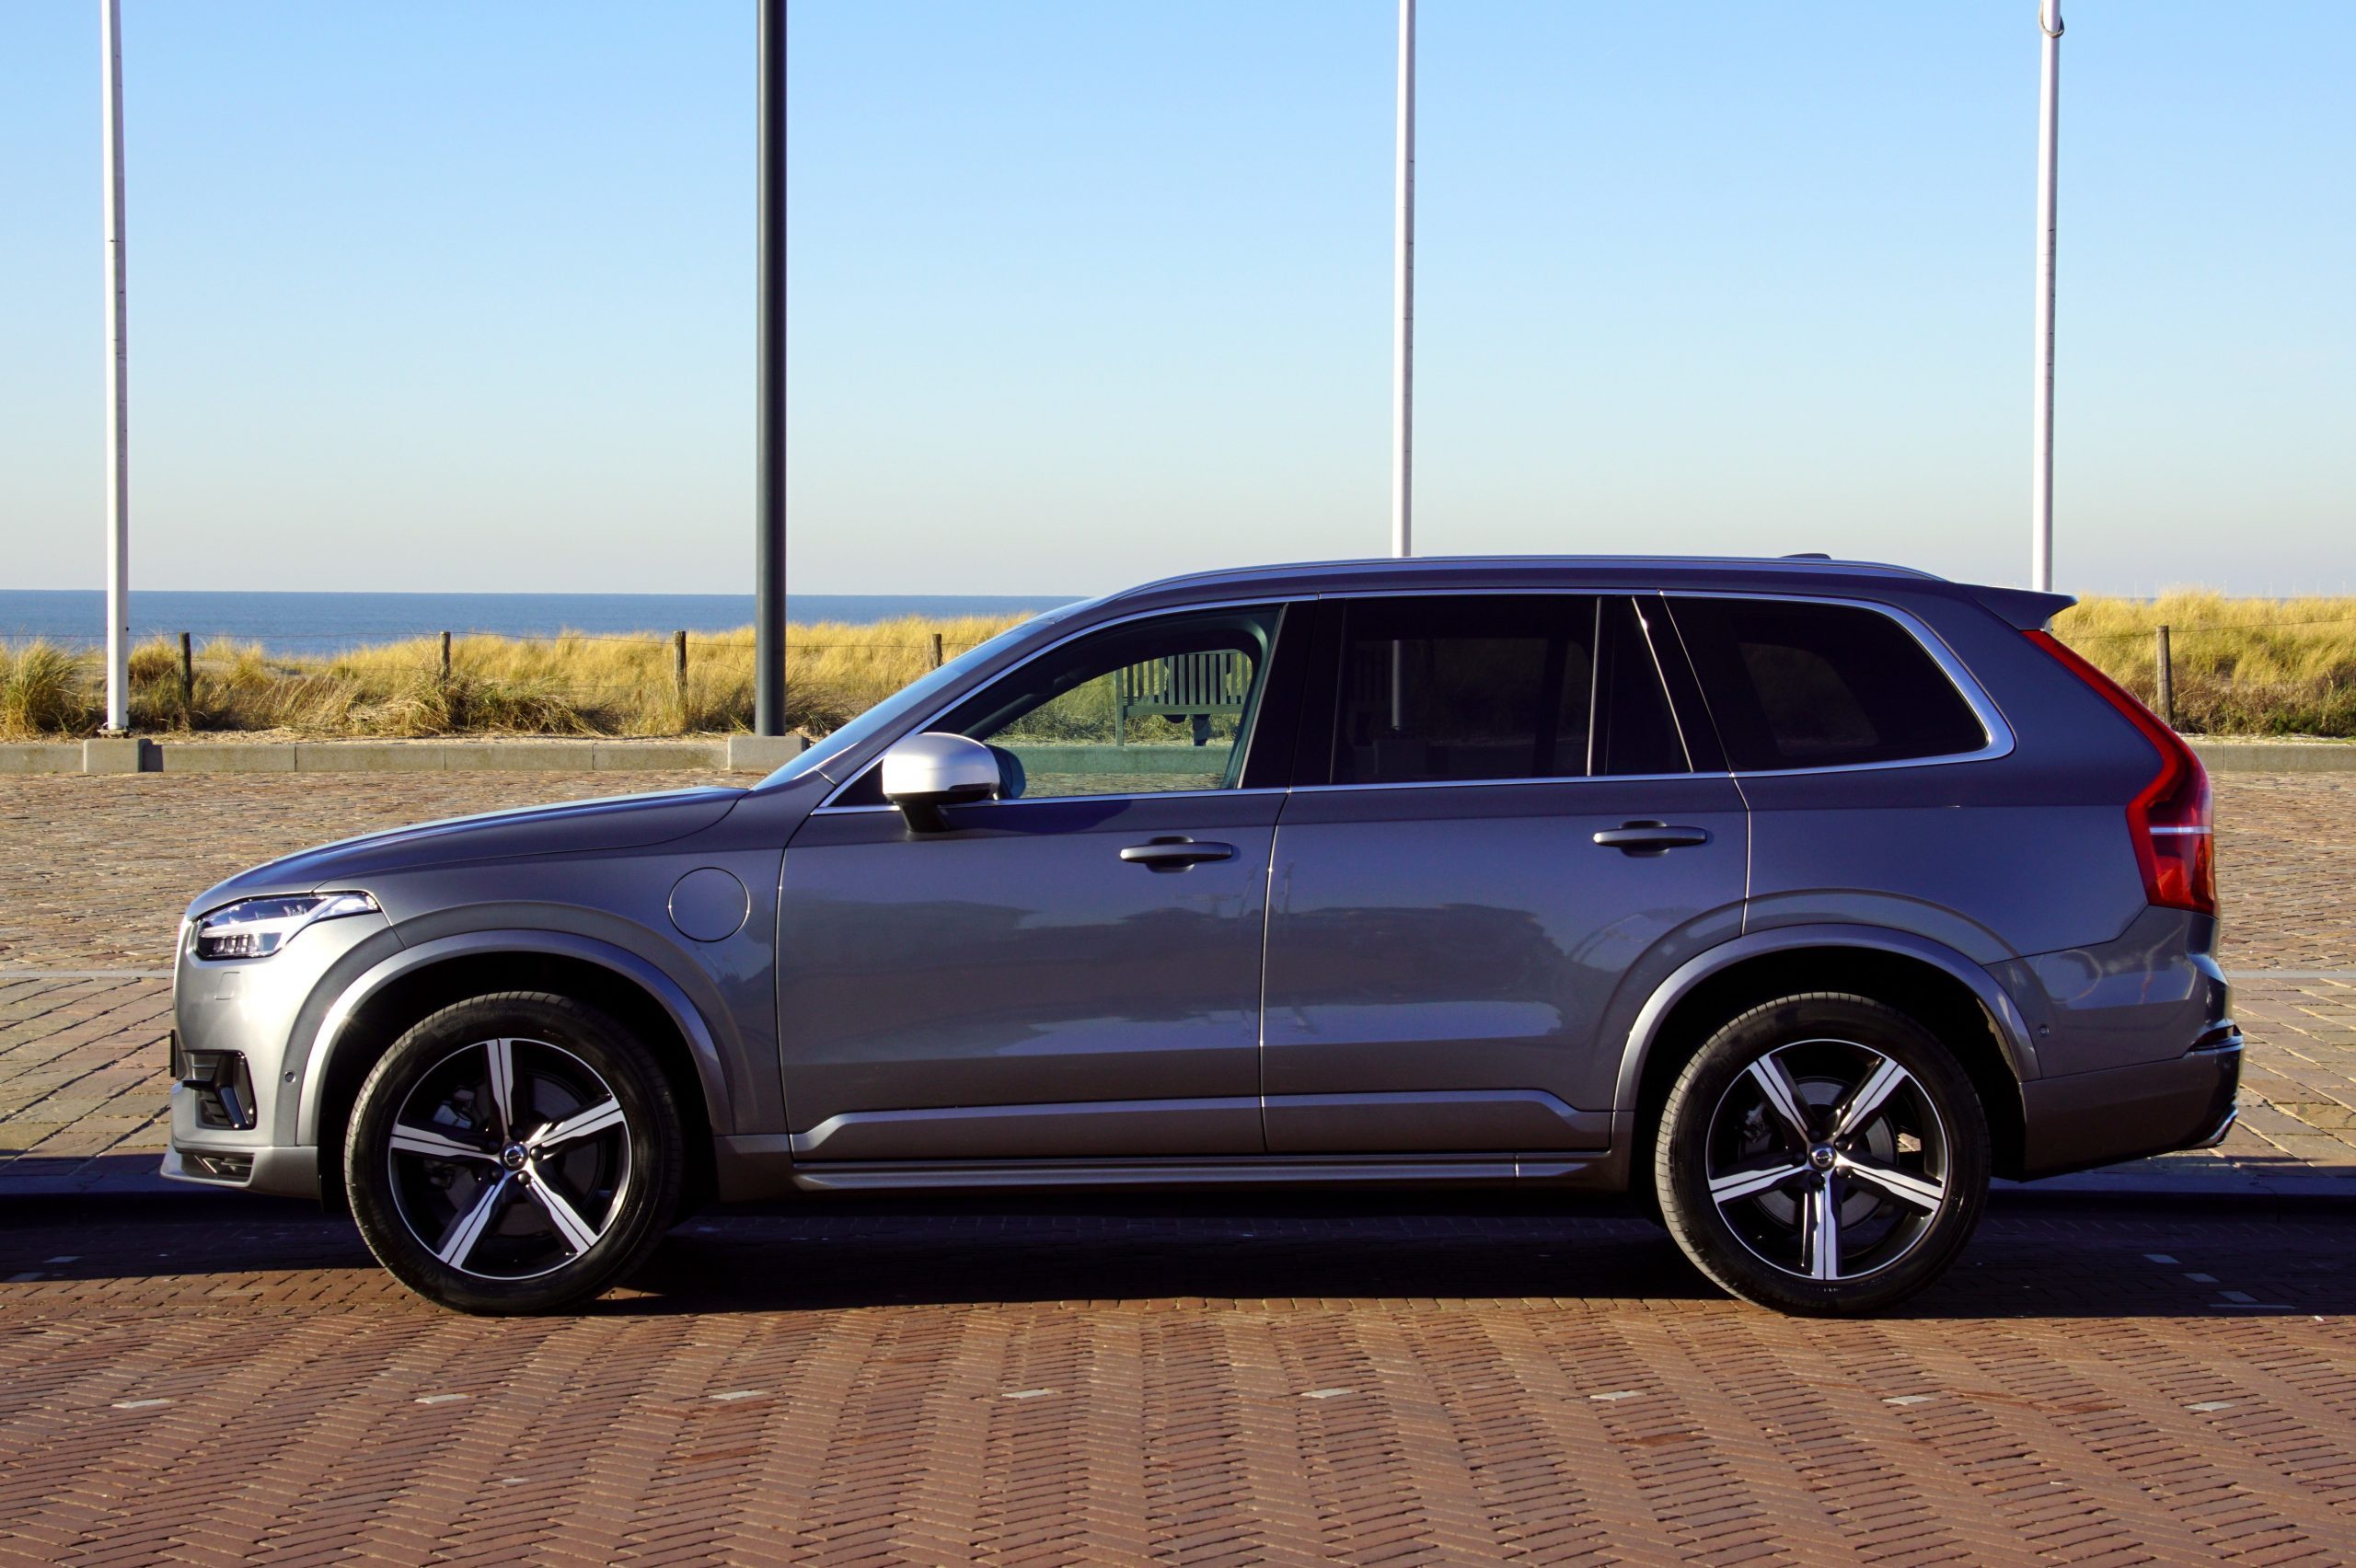 <p>"Luxury vehicles typically lose most of their value over a relatively short period of time, yet the second-generation XC90 projects to keep more than 40 percent of its value after 12 years," according to <a href="https://www.cargurus.com/Cars/articles/2019_used_car_awards" rel="nofollow noopener noreferrer">Car Gurus</a>. Volvo's award-winning, sleek and safe SUV is the top choice for a used SUV. Additionally, Volvo ranks as one of the <a href="https://www.rd.com/article/car-brands-most-fewest-recalls/">car brands with the least number of recalls</a>.</p>